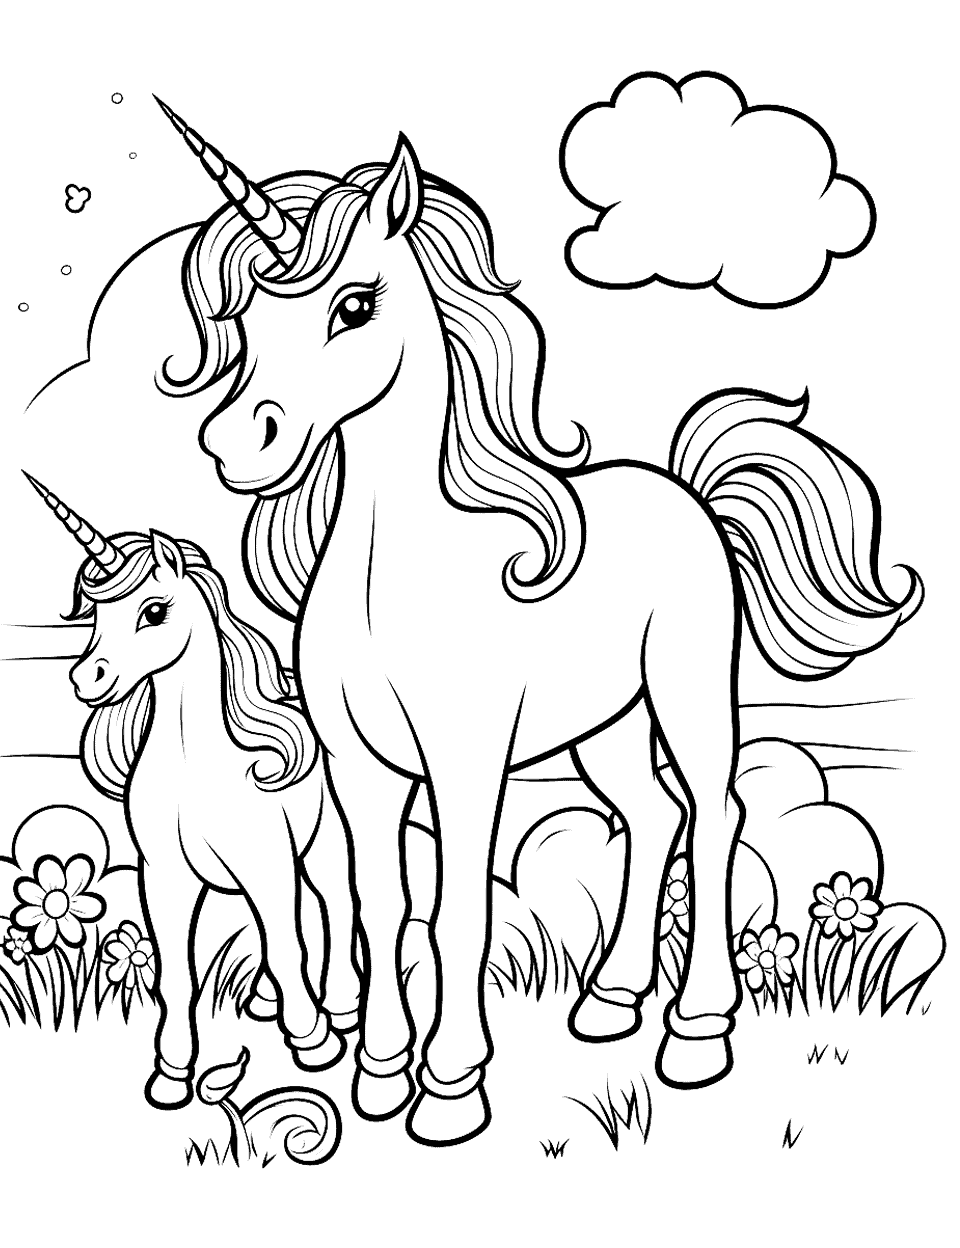 Adorable Unicorn Family Coloring Page - A coloring page featuring an adorable unicorn family, including a mother and her baby, in a cozy setting.